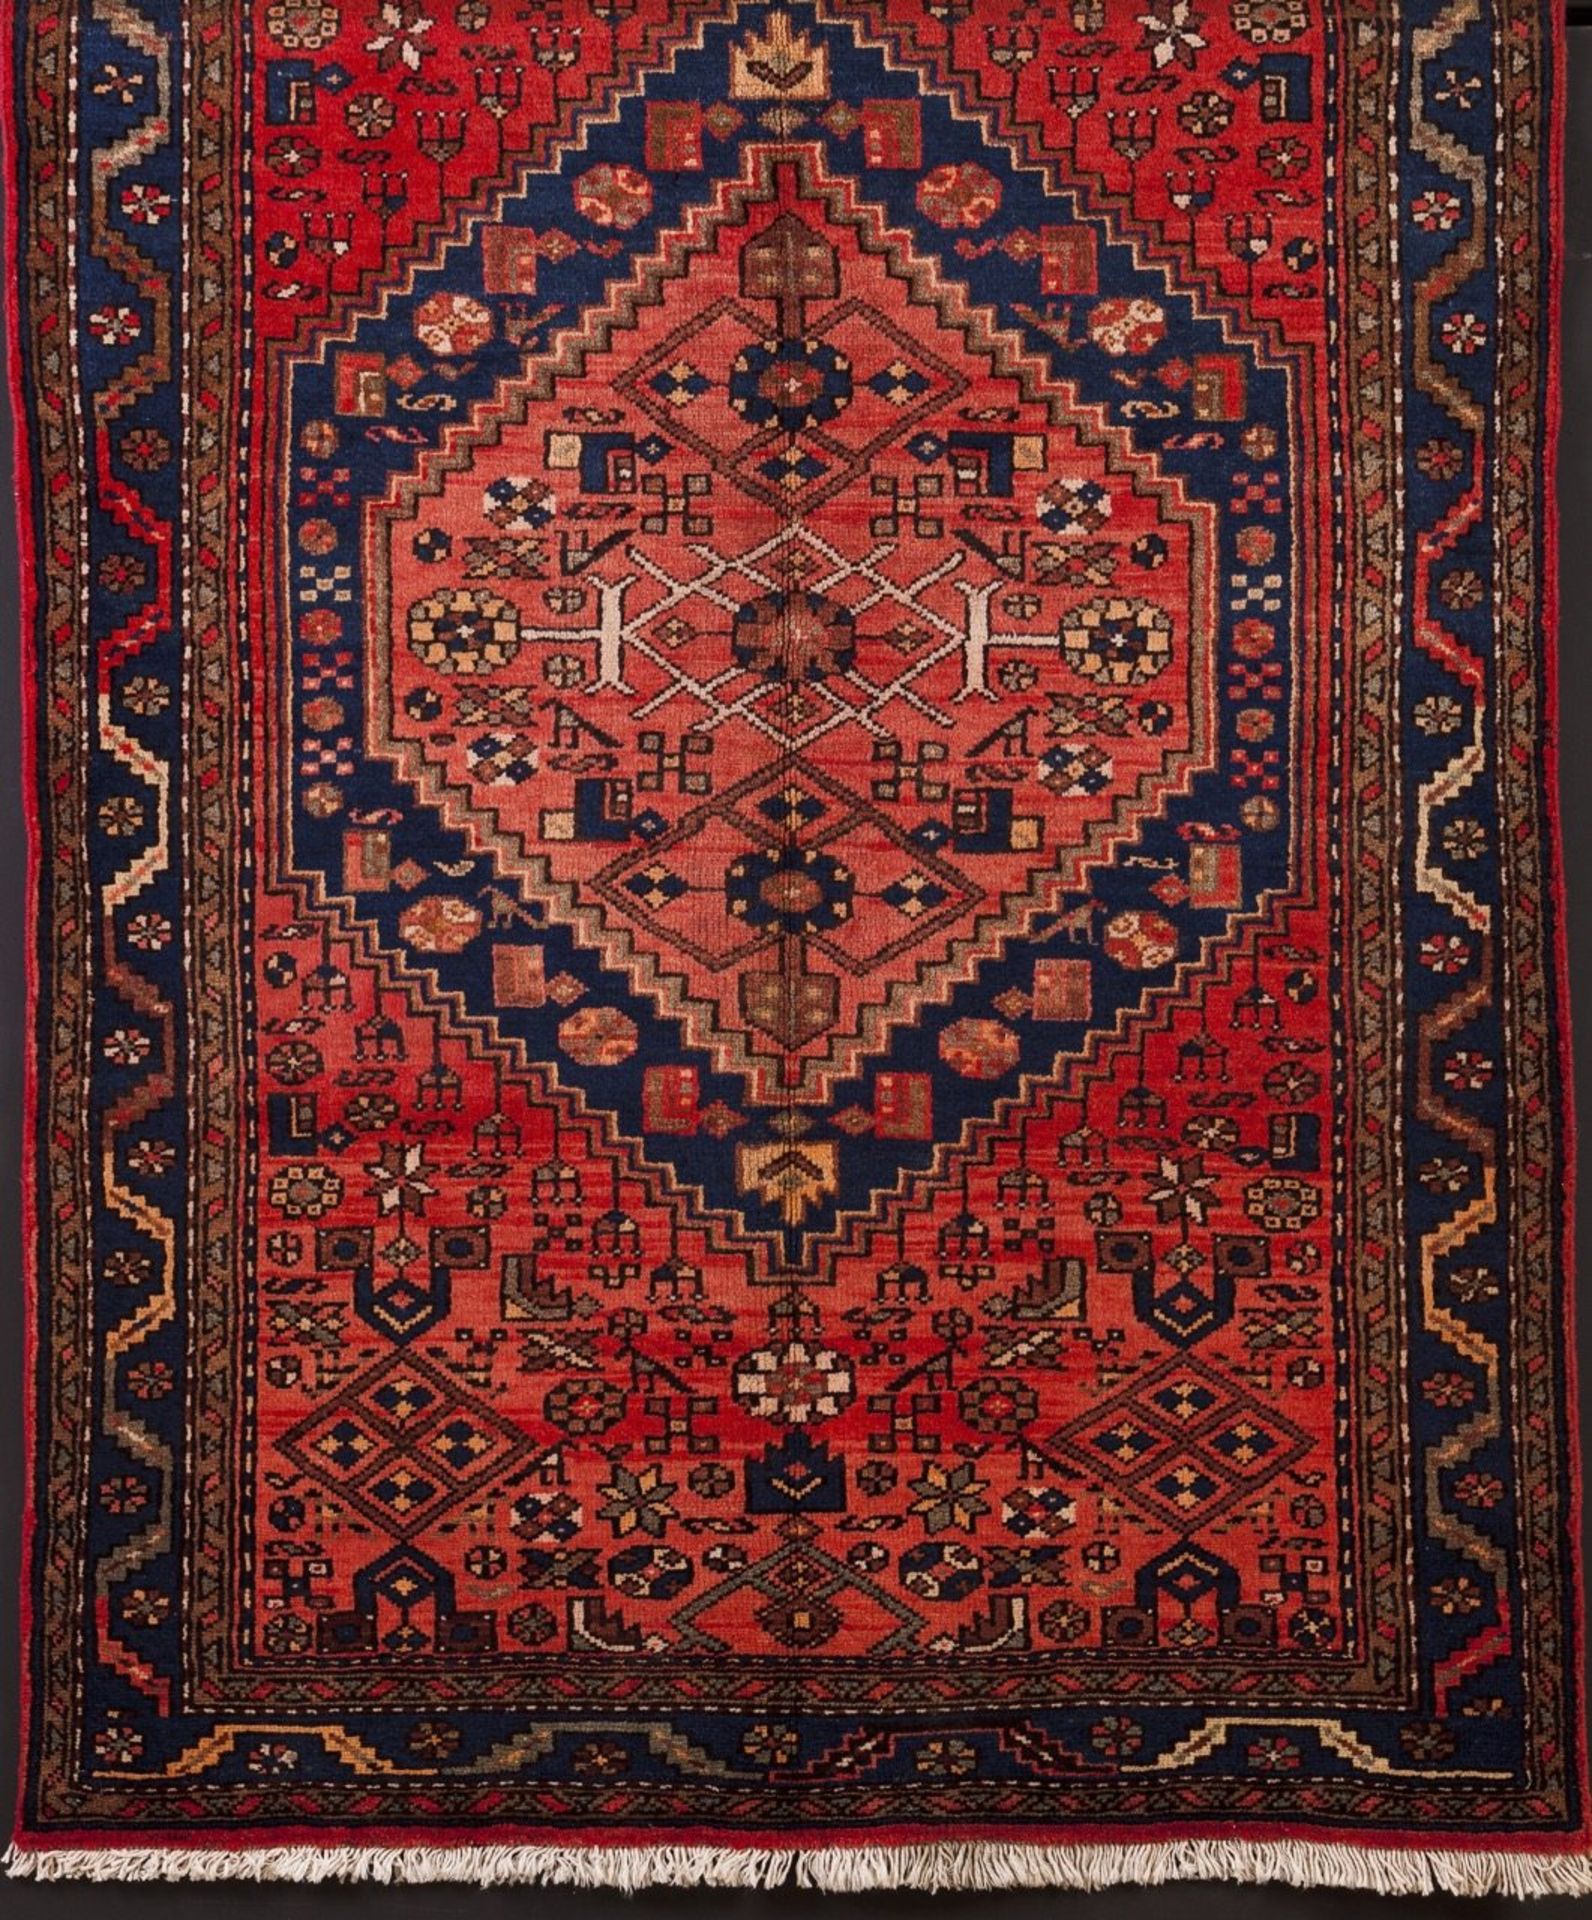 A Zanjan Persian carpet  Cotton and wool  Geometric decoration in blue, red and brown    225x135 cm